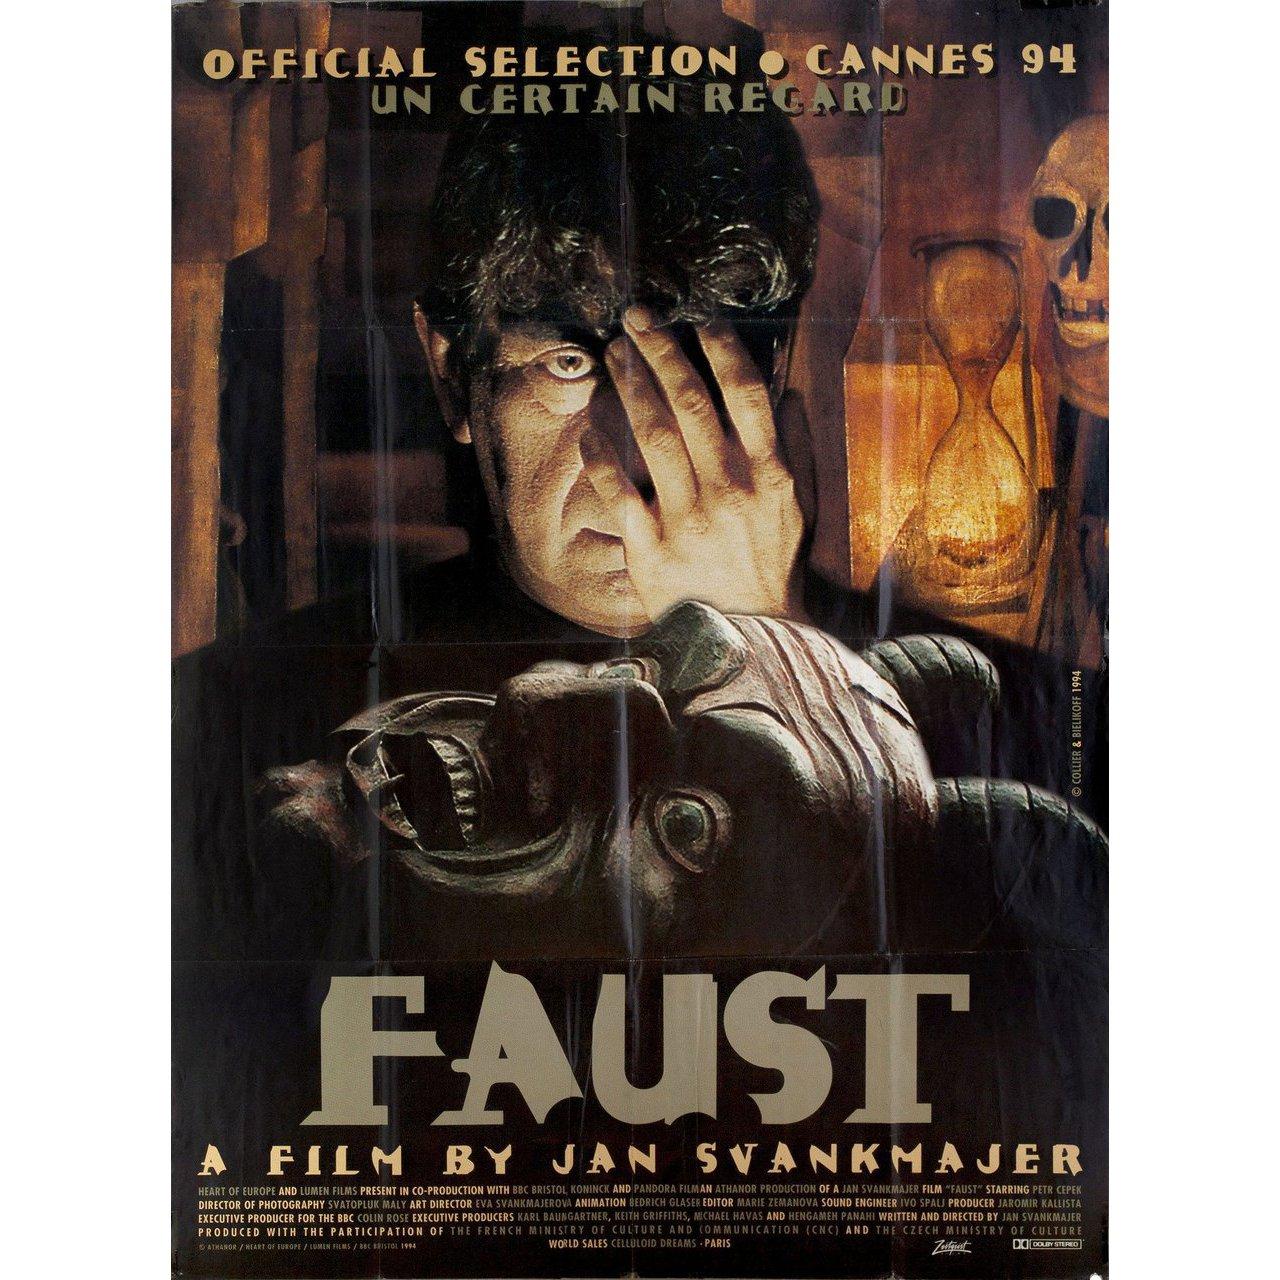 Original 1994 French grande poster for the film “Faust” (Lesson Faust) directed by Jan Svankmajer with Petr Cepek / Jan Kraus / Vladimir Kudla / Antonin Zacpal. Good very good condition, folded with tape on front. Many original posters were issued